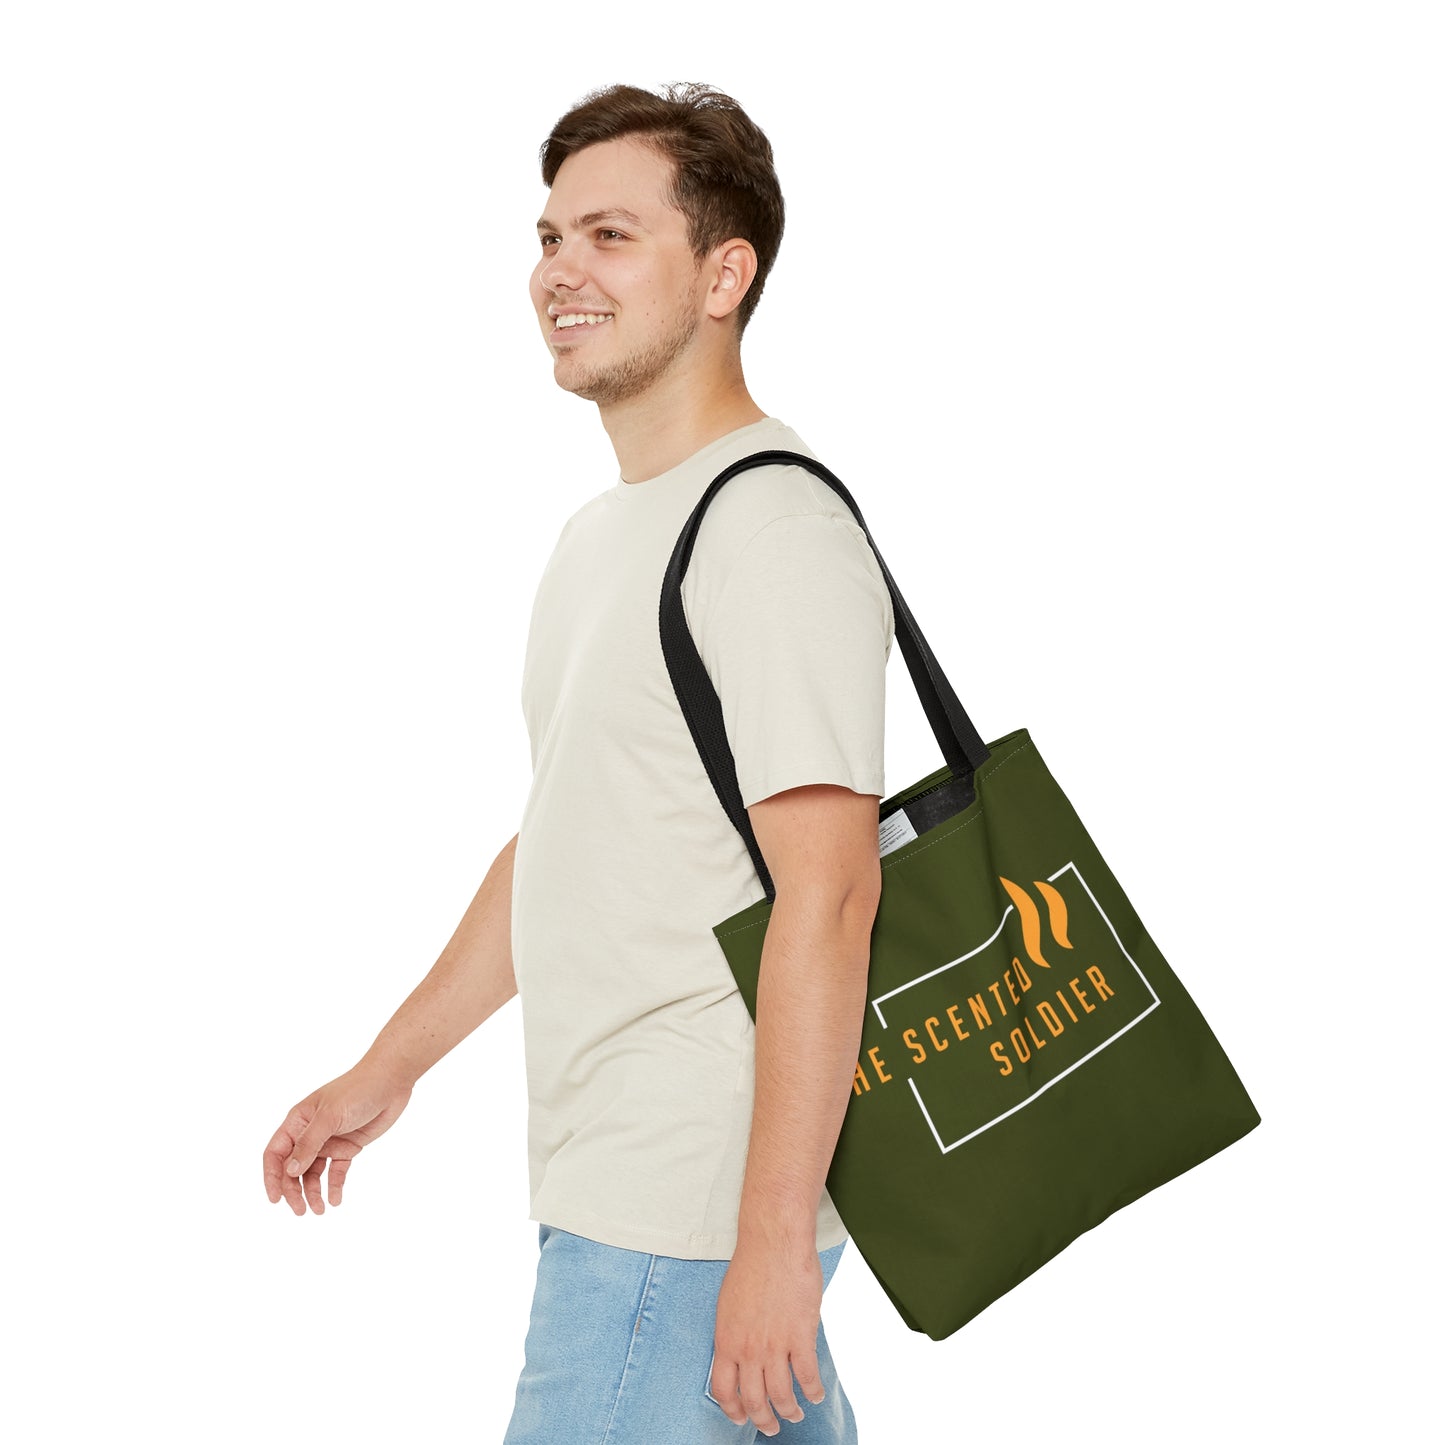 The Scented Soldier Tote Bag